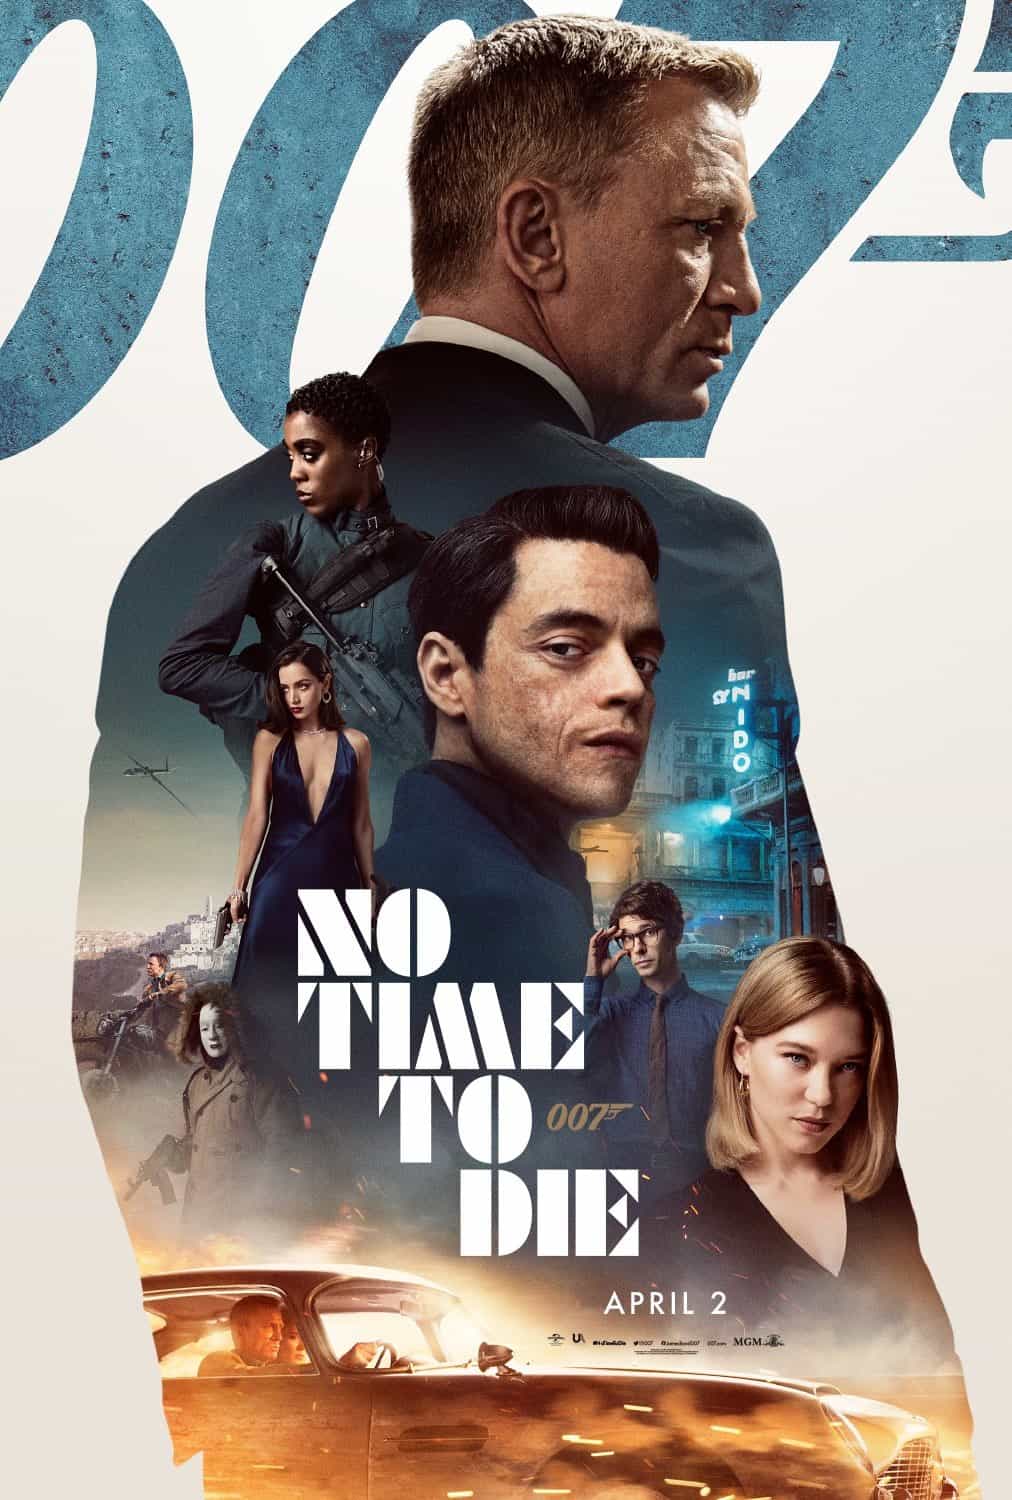 New North American trailer for Bond movie No Time To Die